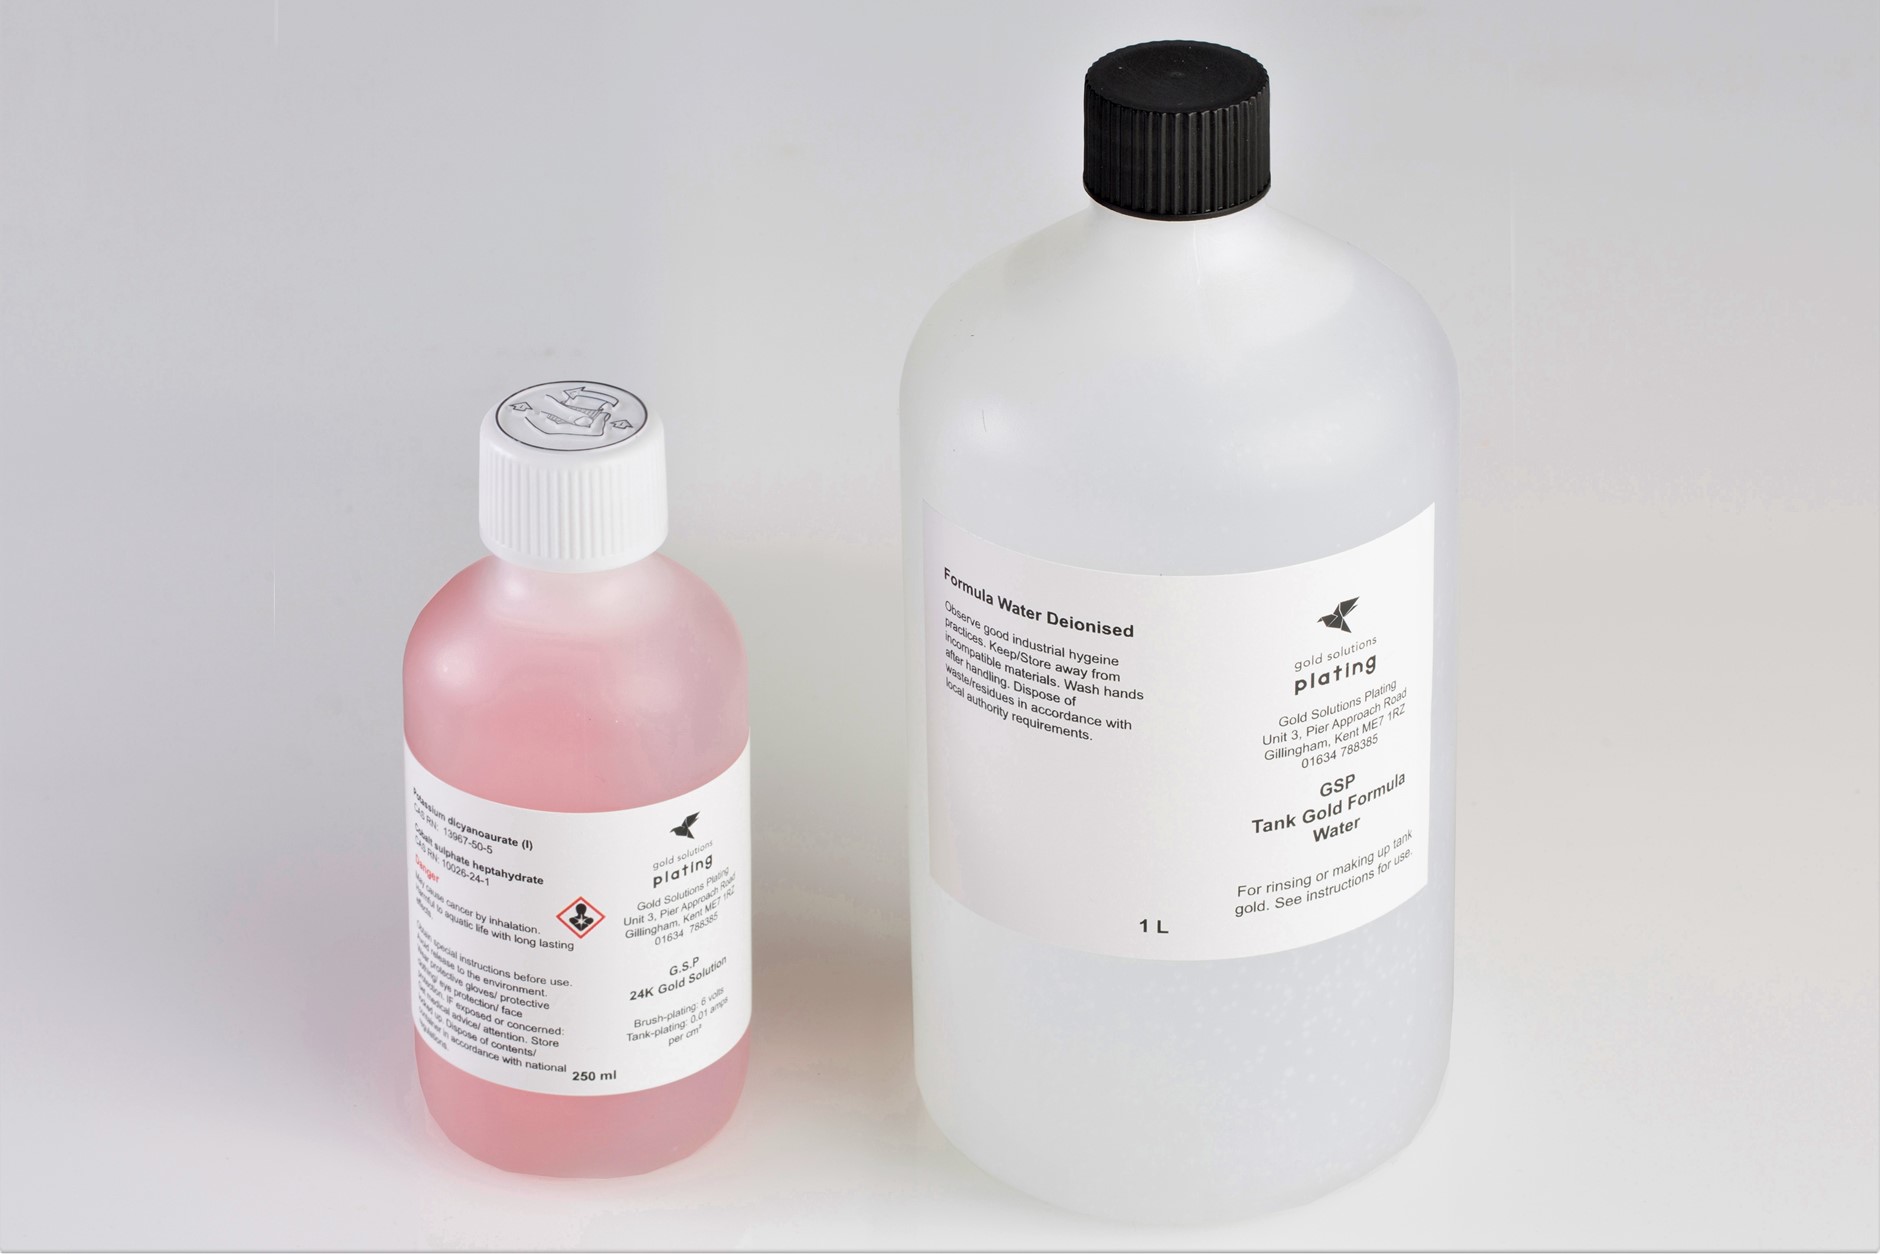 G.S.P Tank Gold Plating Solution, consisting of 1 litre bottle deionised water and 250ml 24K Gold Plating Solution 